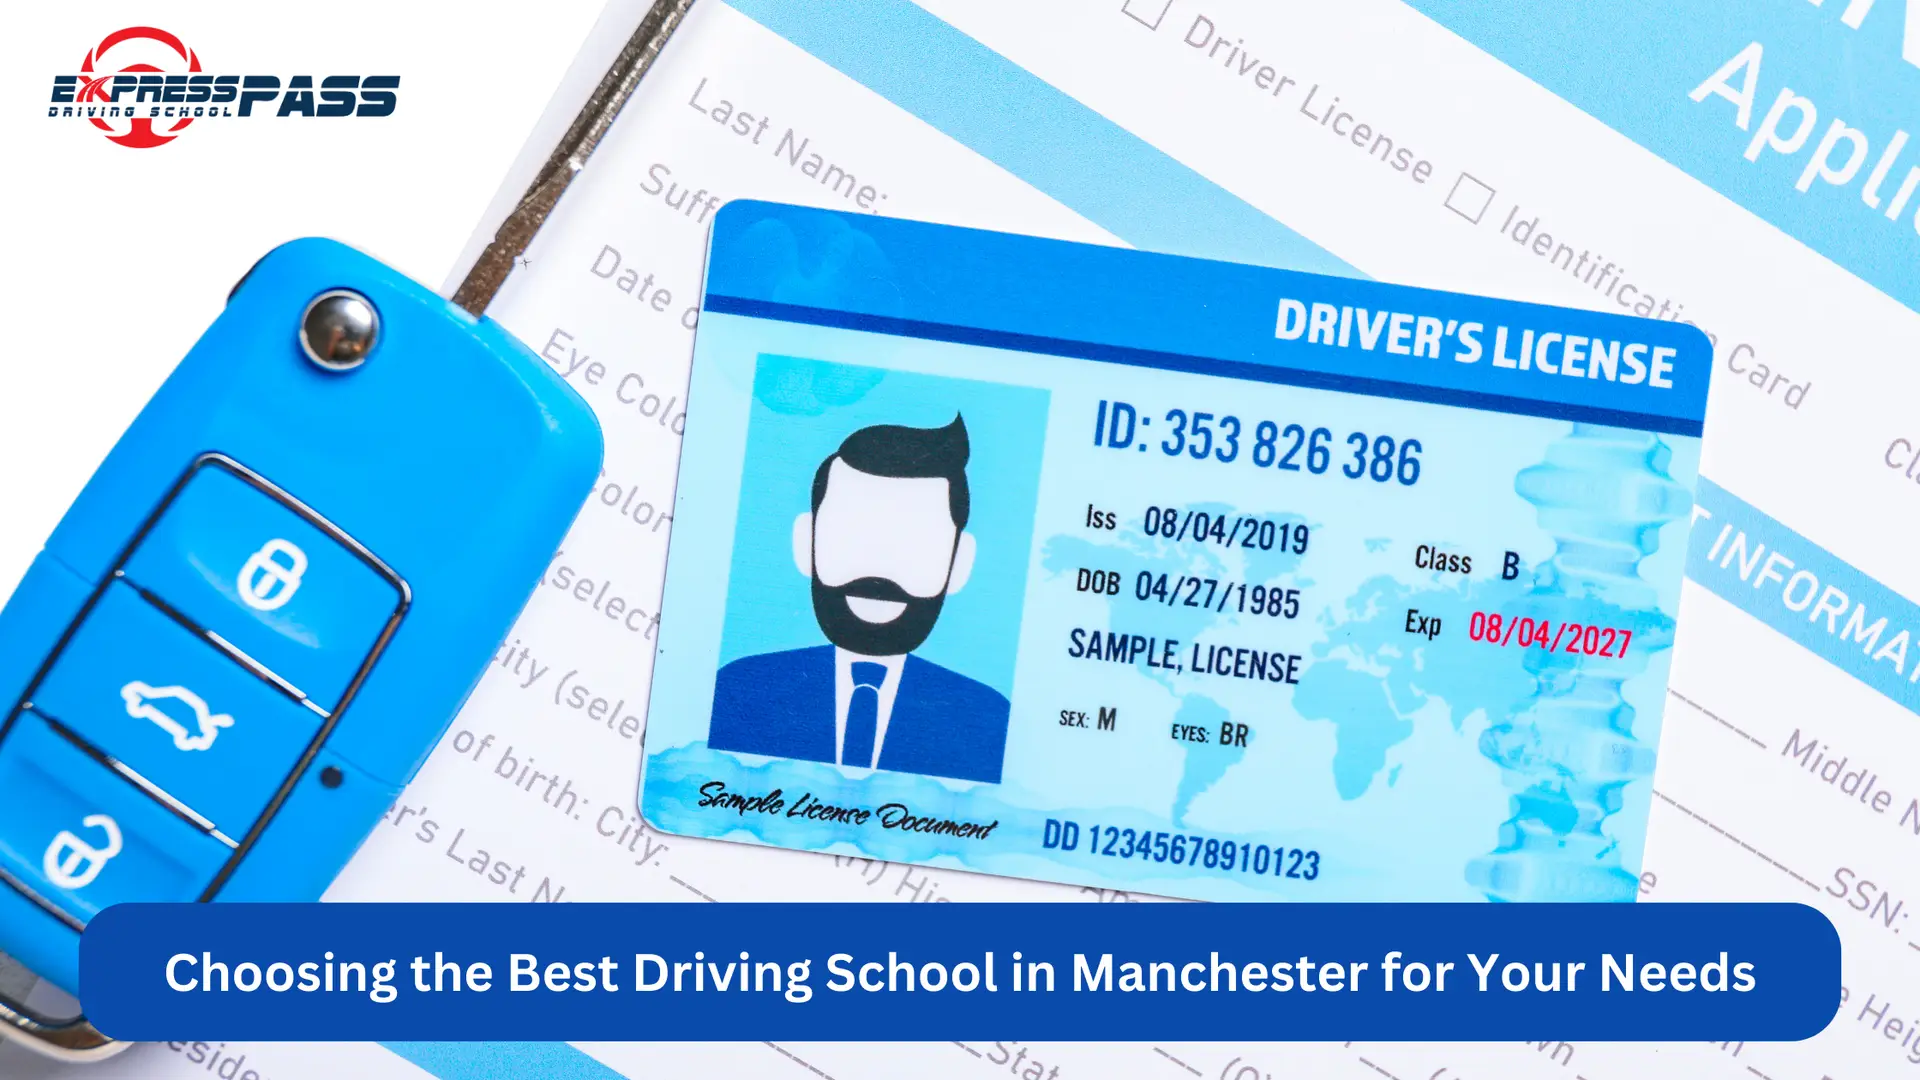 How to Prepare for Your Automatic Driving Lessons at a Manchester School